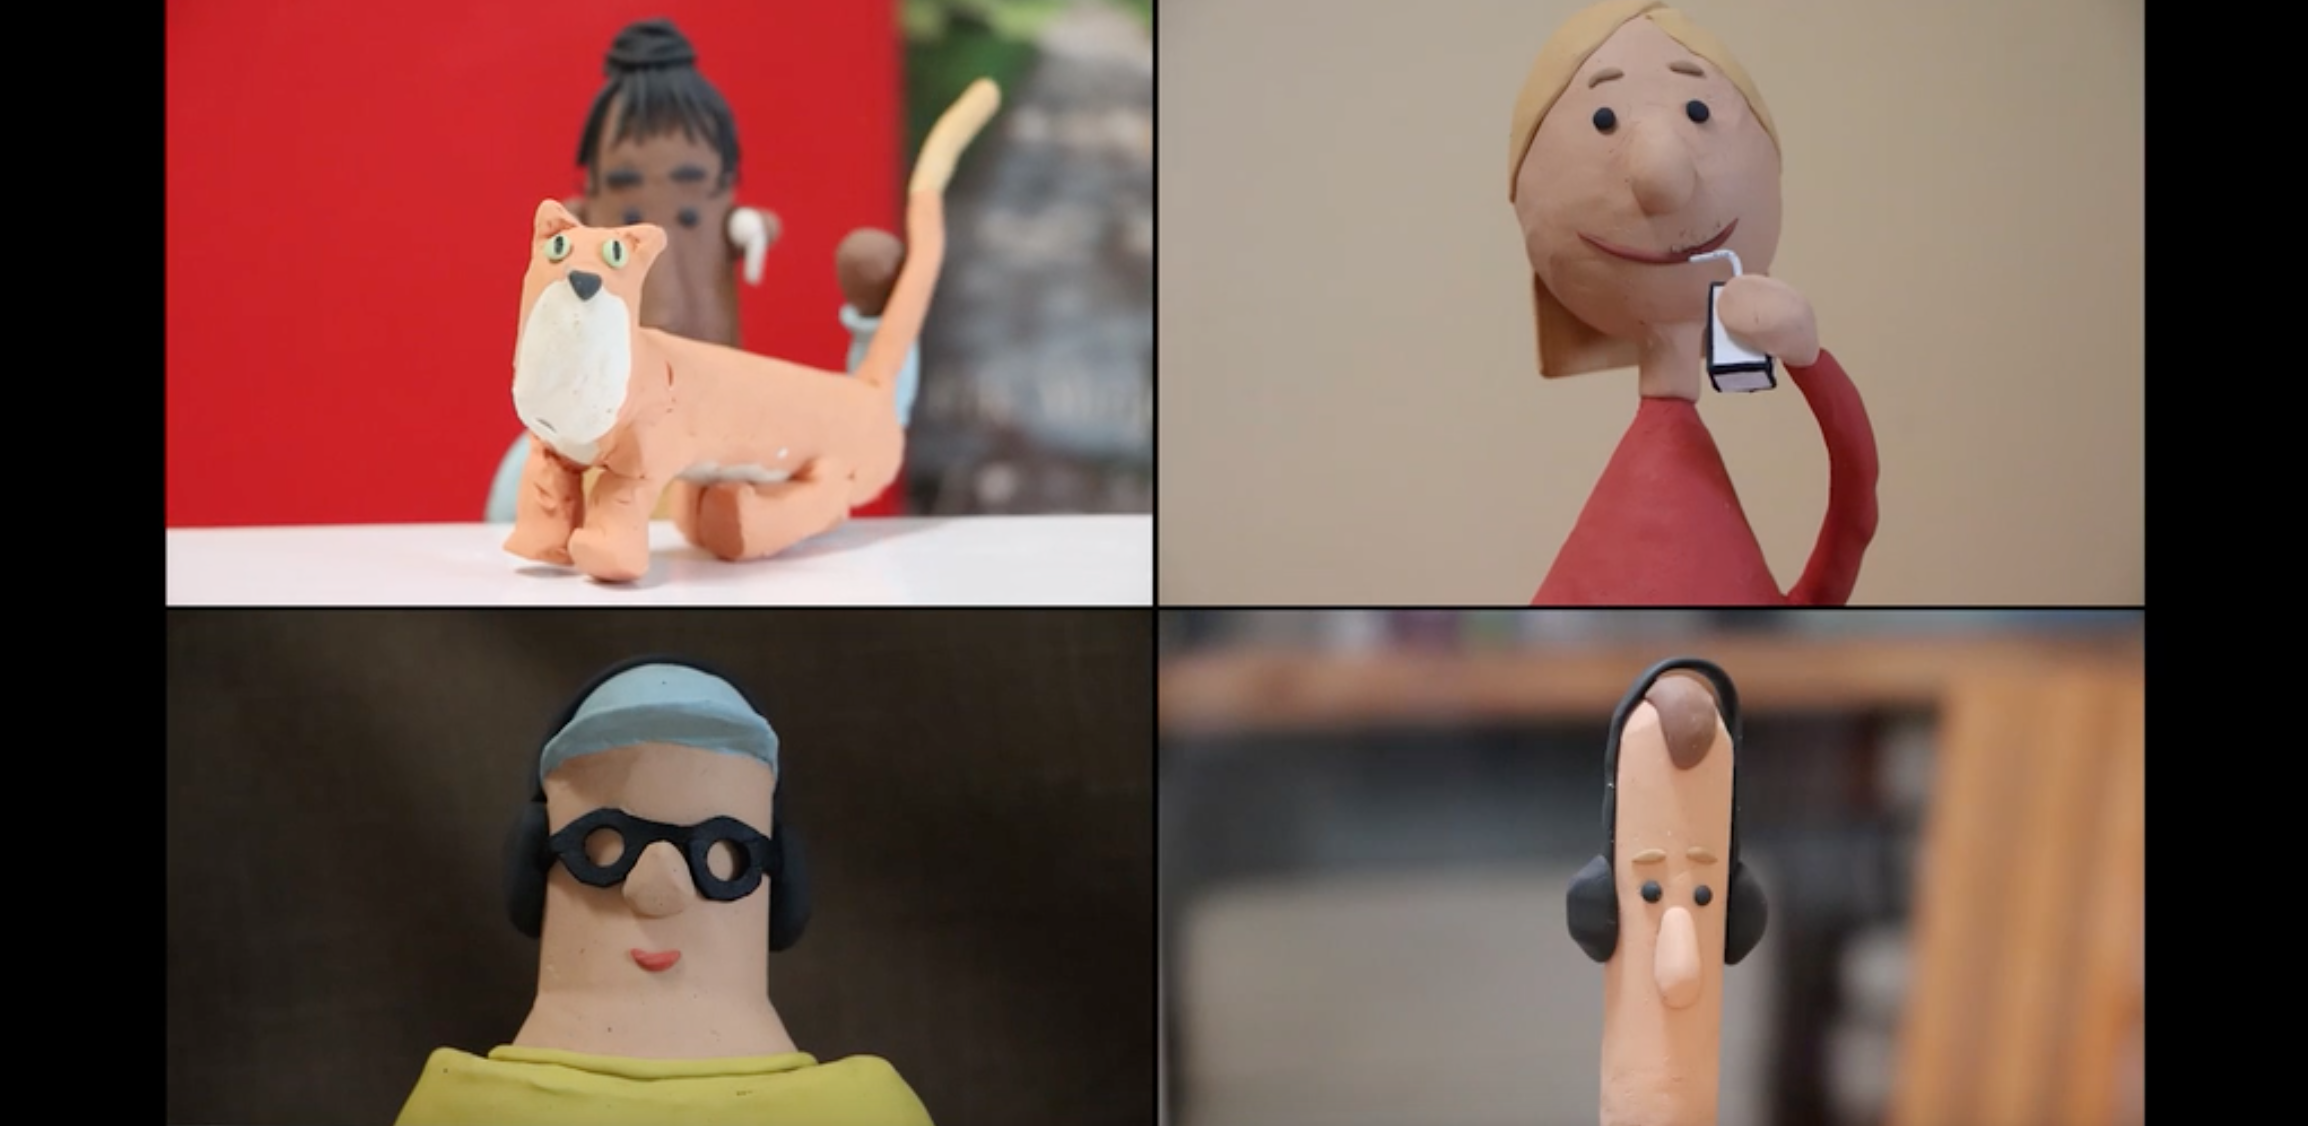 Scene from claymation movie